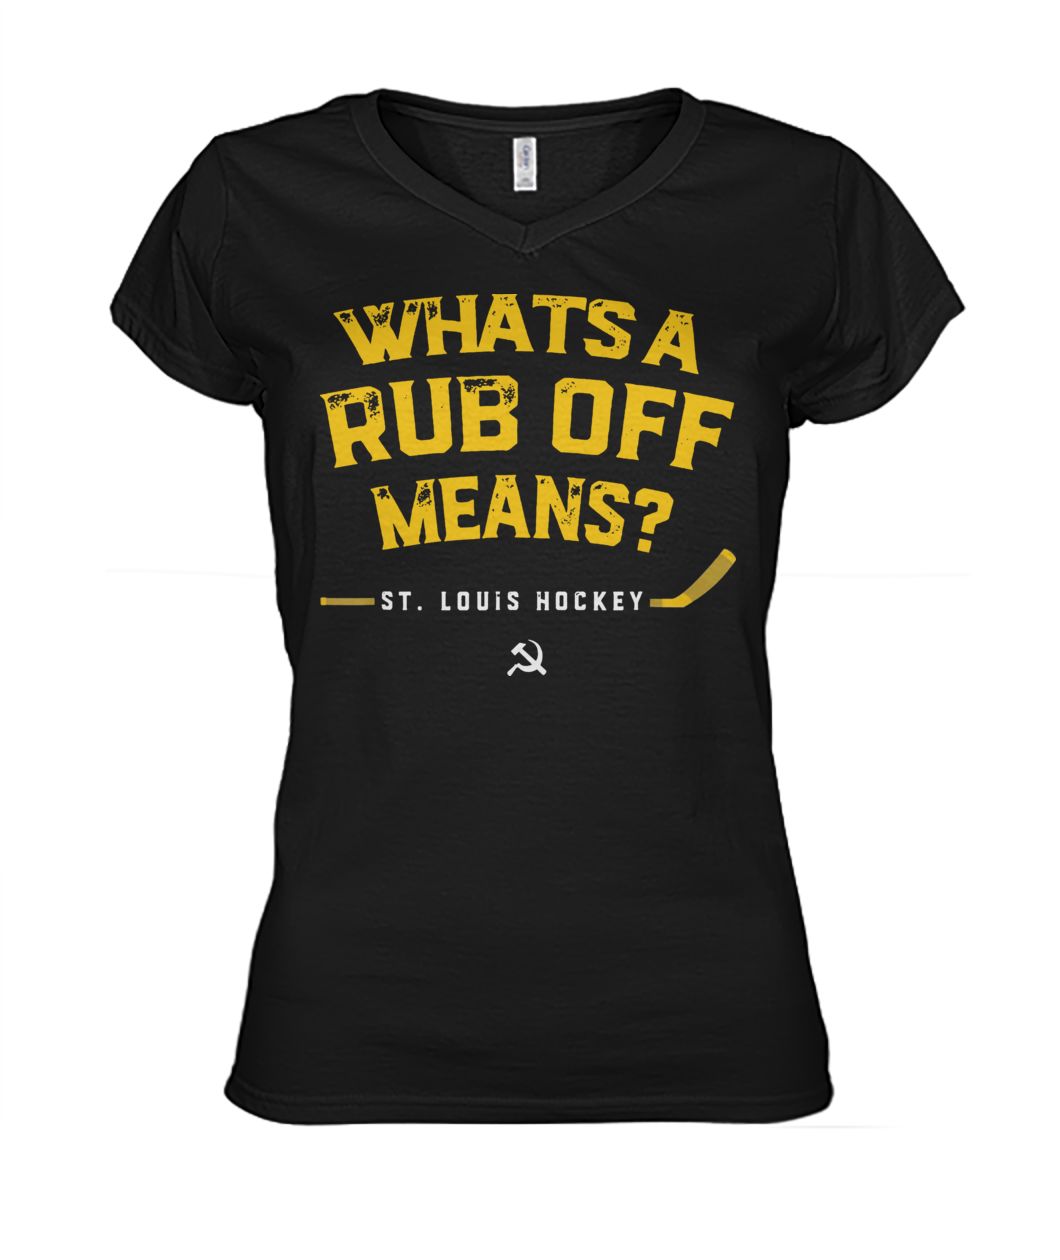 What's a rub off means st louis hockey women's v-neck